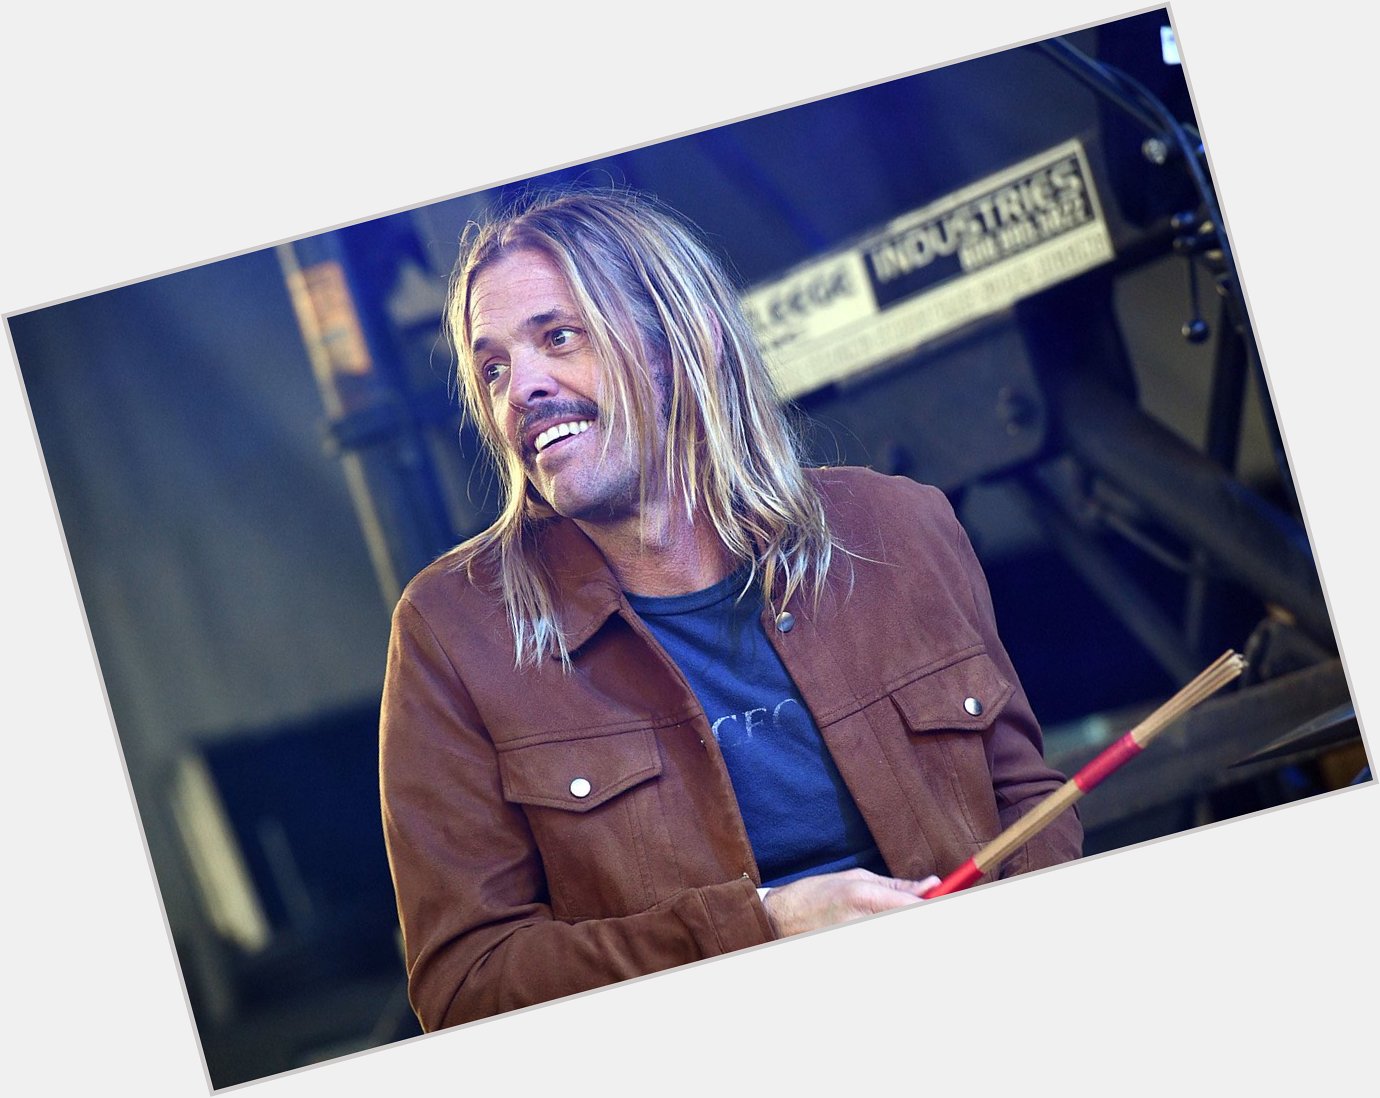 I\d like to wish a happy 49th birthday to Taylor Hawkins, drummer for Foo Fighters! 